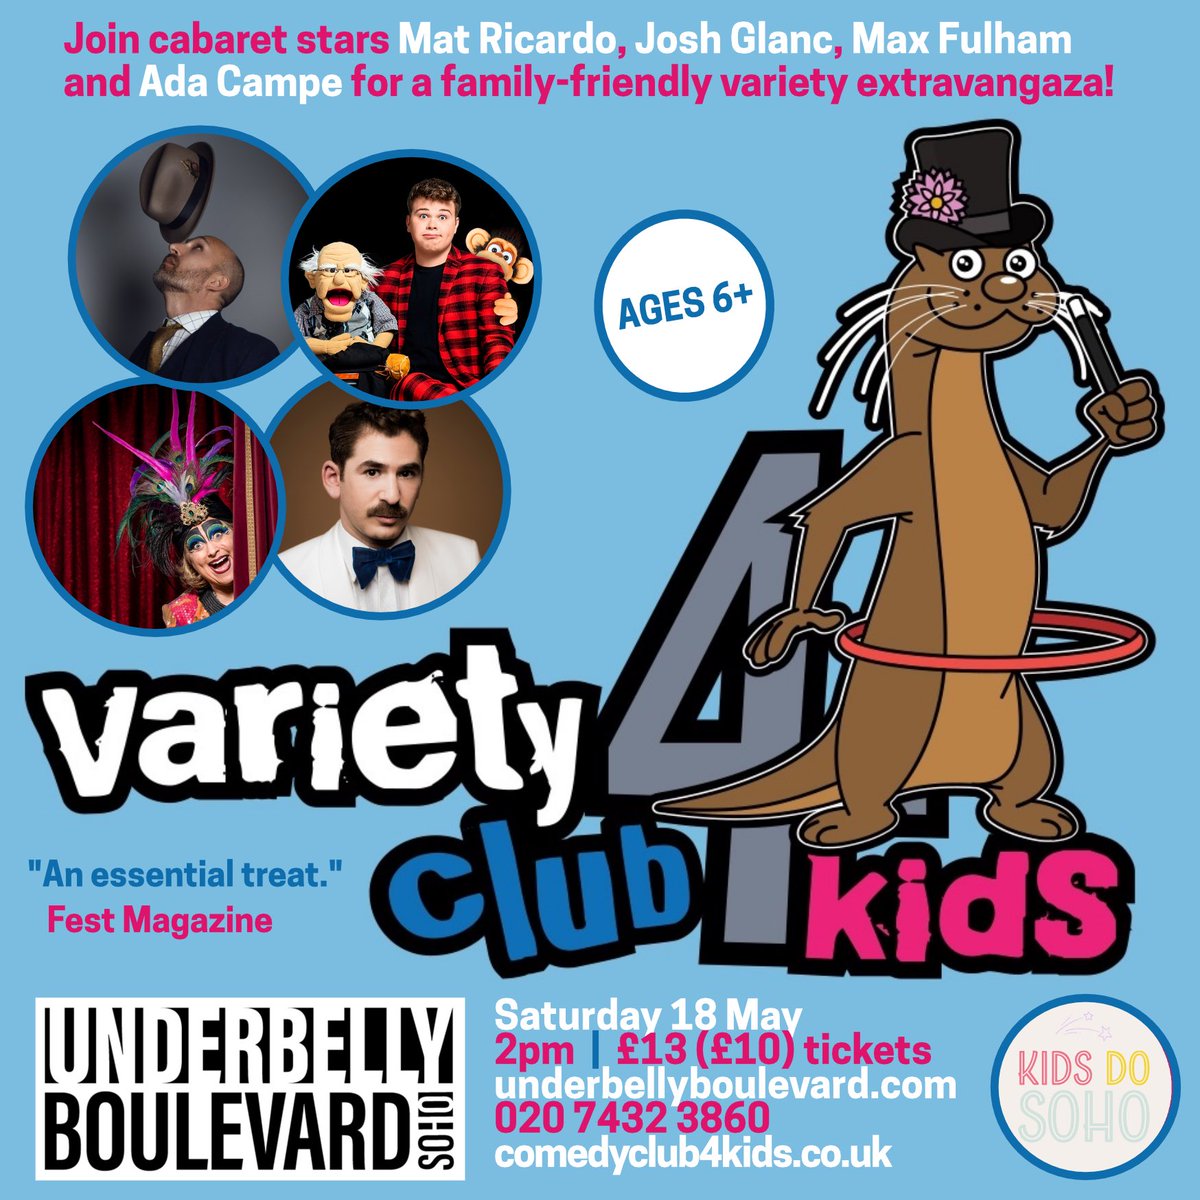 Happy #musichallvarietyday! Share the joy of variety by introducing the next generation to it and coming to Variety Club 4 Kids this Saturday at @ubsoho 🥳 Juggling, magic, clowning & ventriloquism - with @MatRicardo @MaxFulham @JoshGlanc et moi! Tickets: underbellyboulevard.com/tickets/variet…